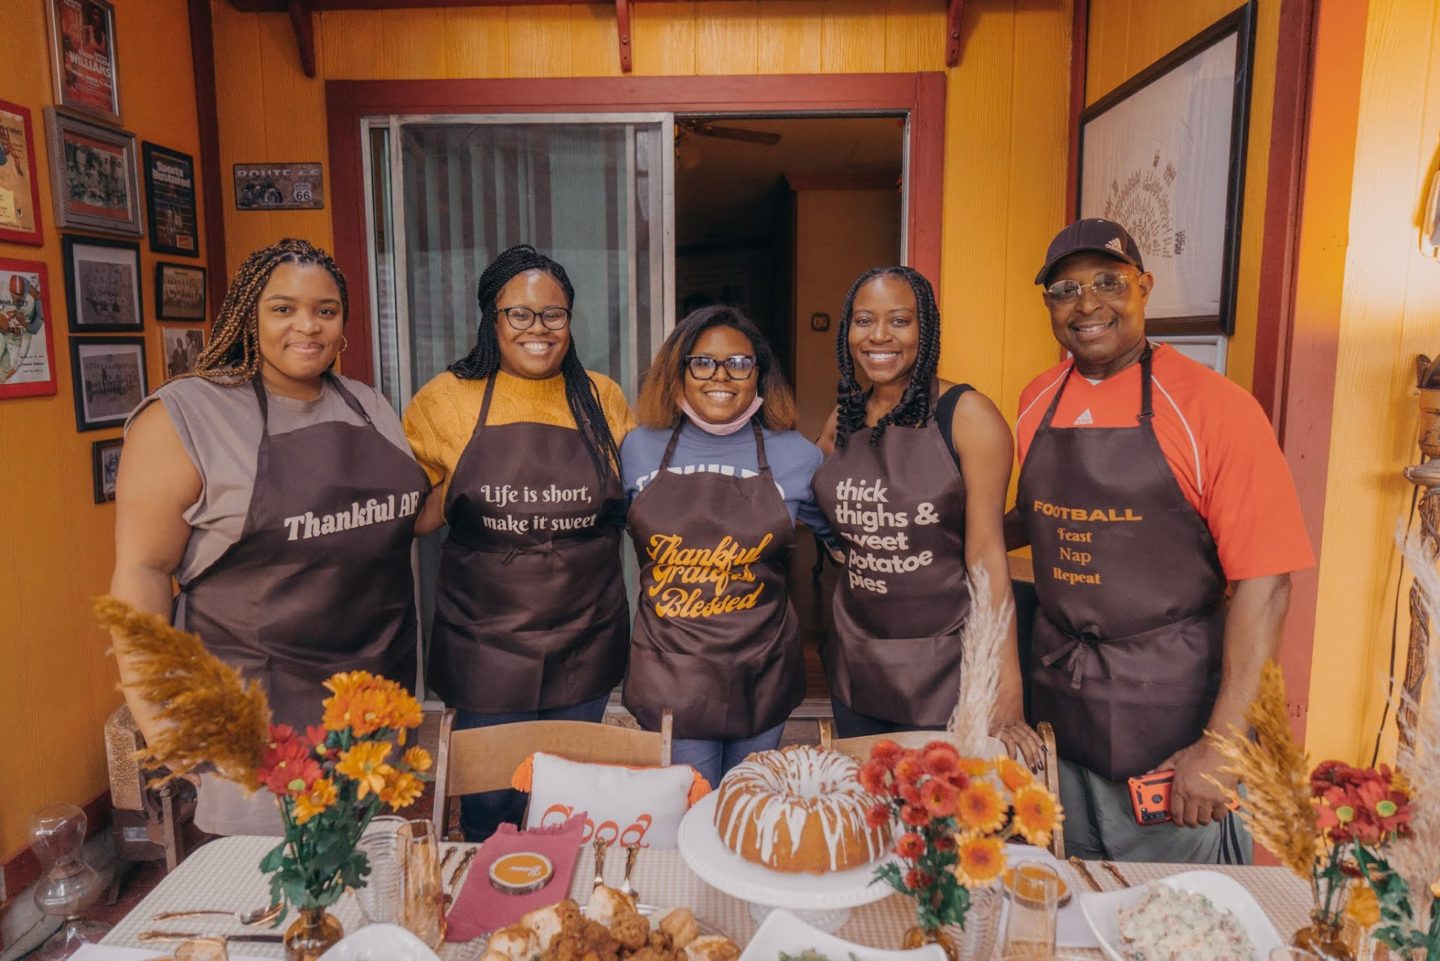 Friendsgiving Inspiration from Howard University Alum and Beck&Call Founder